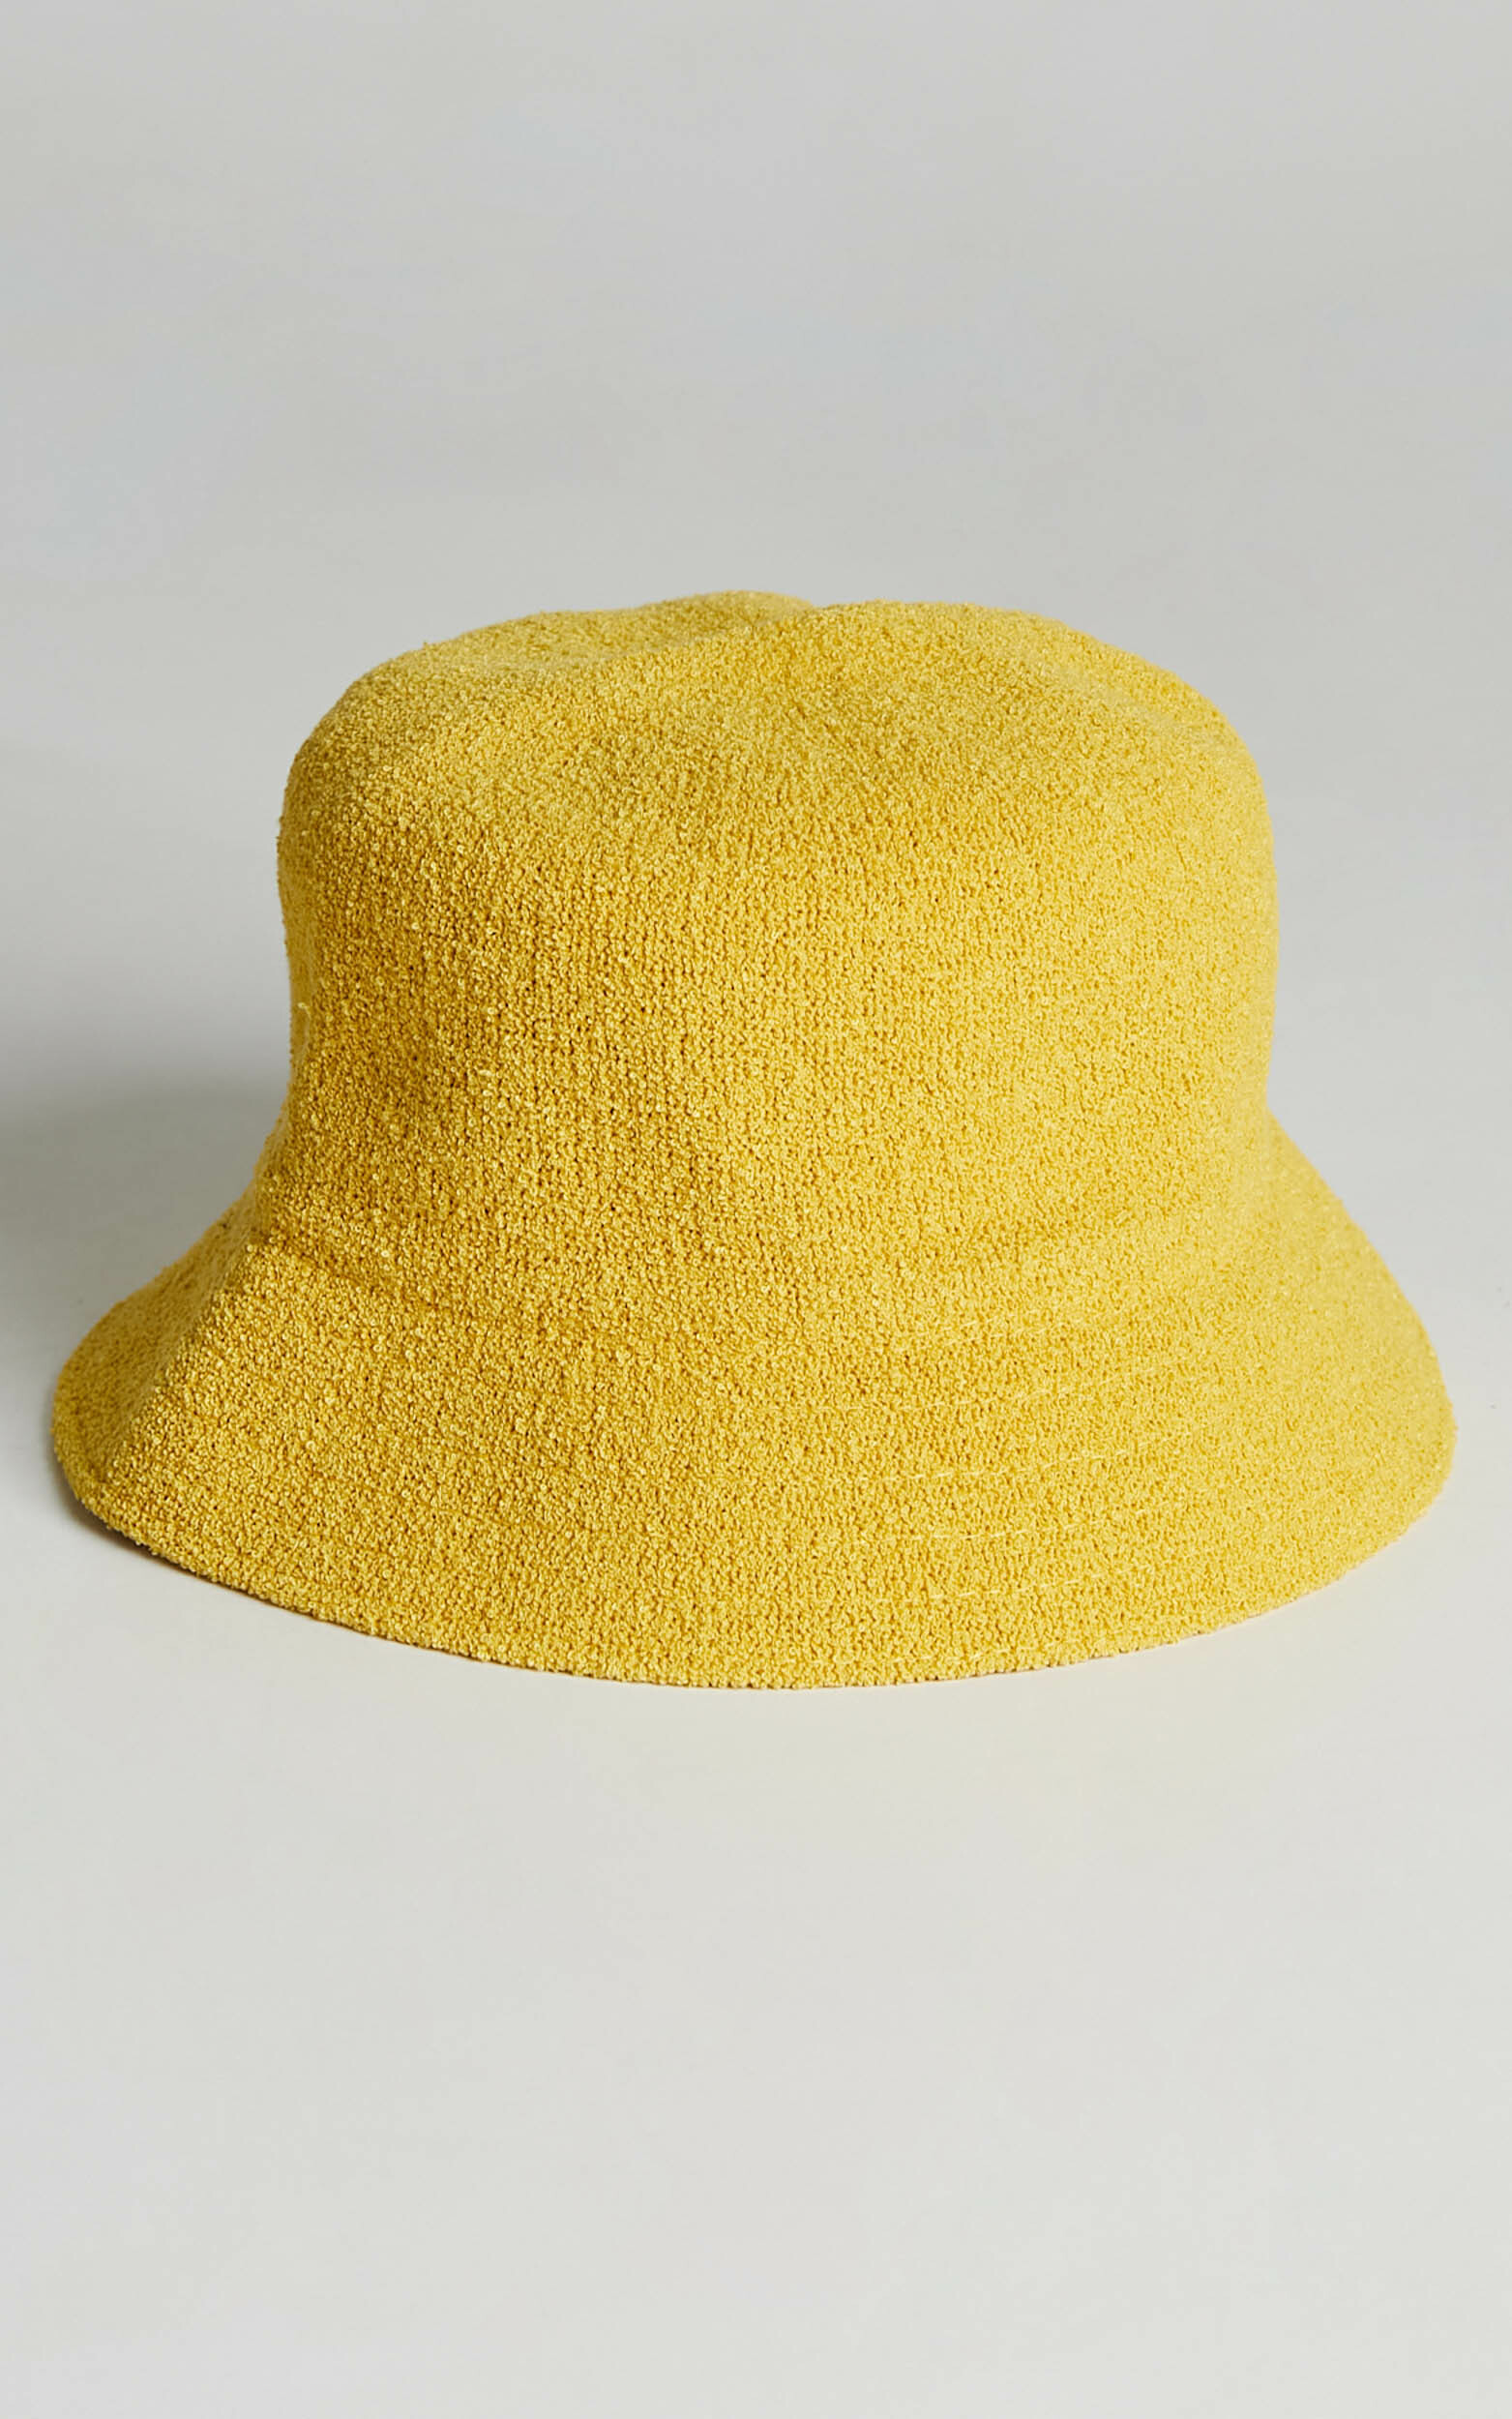 Charita Bucket Hat in Yellow - OneSize, YEL1, hi-res image number null